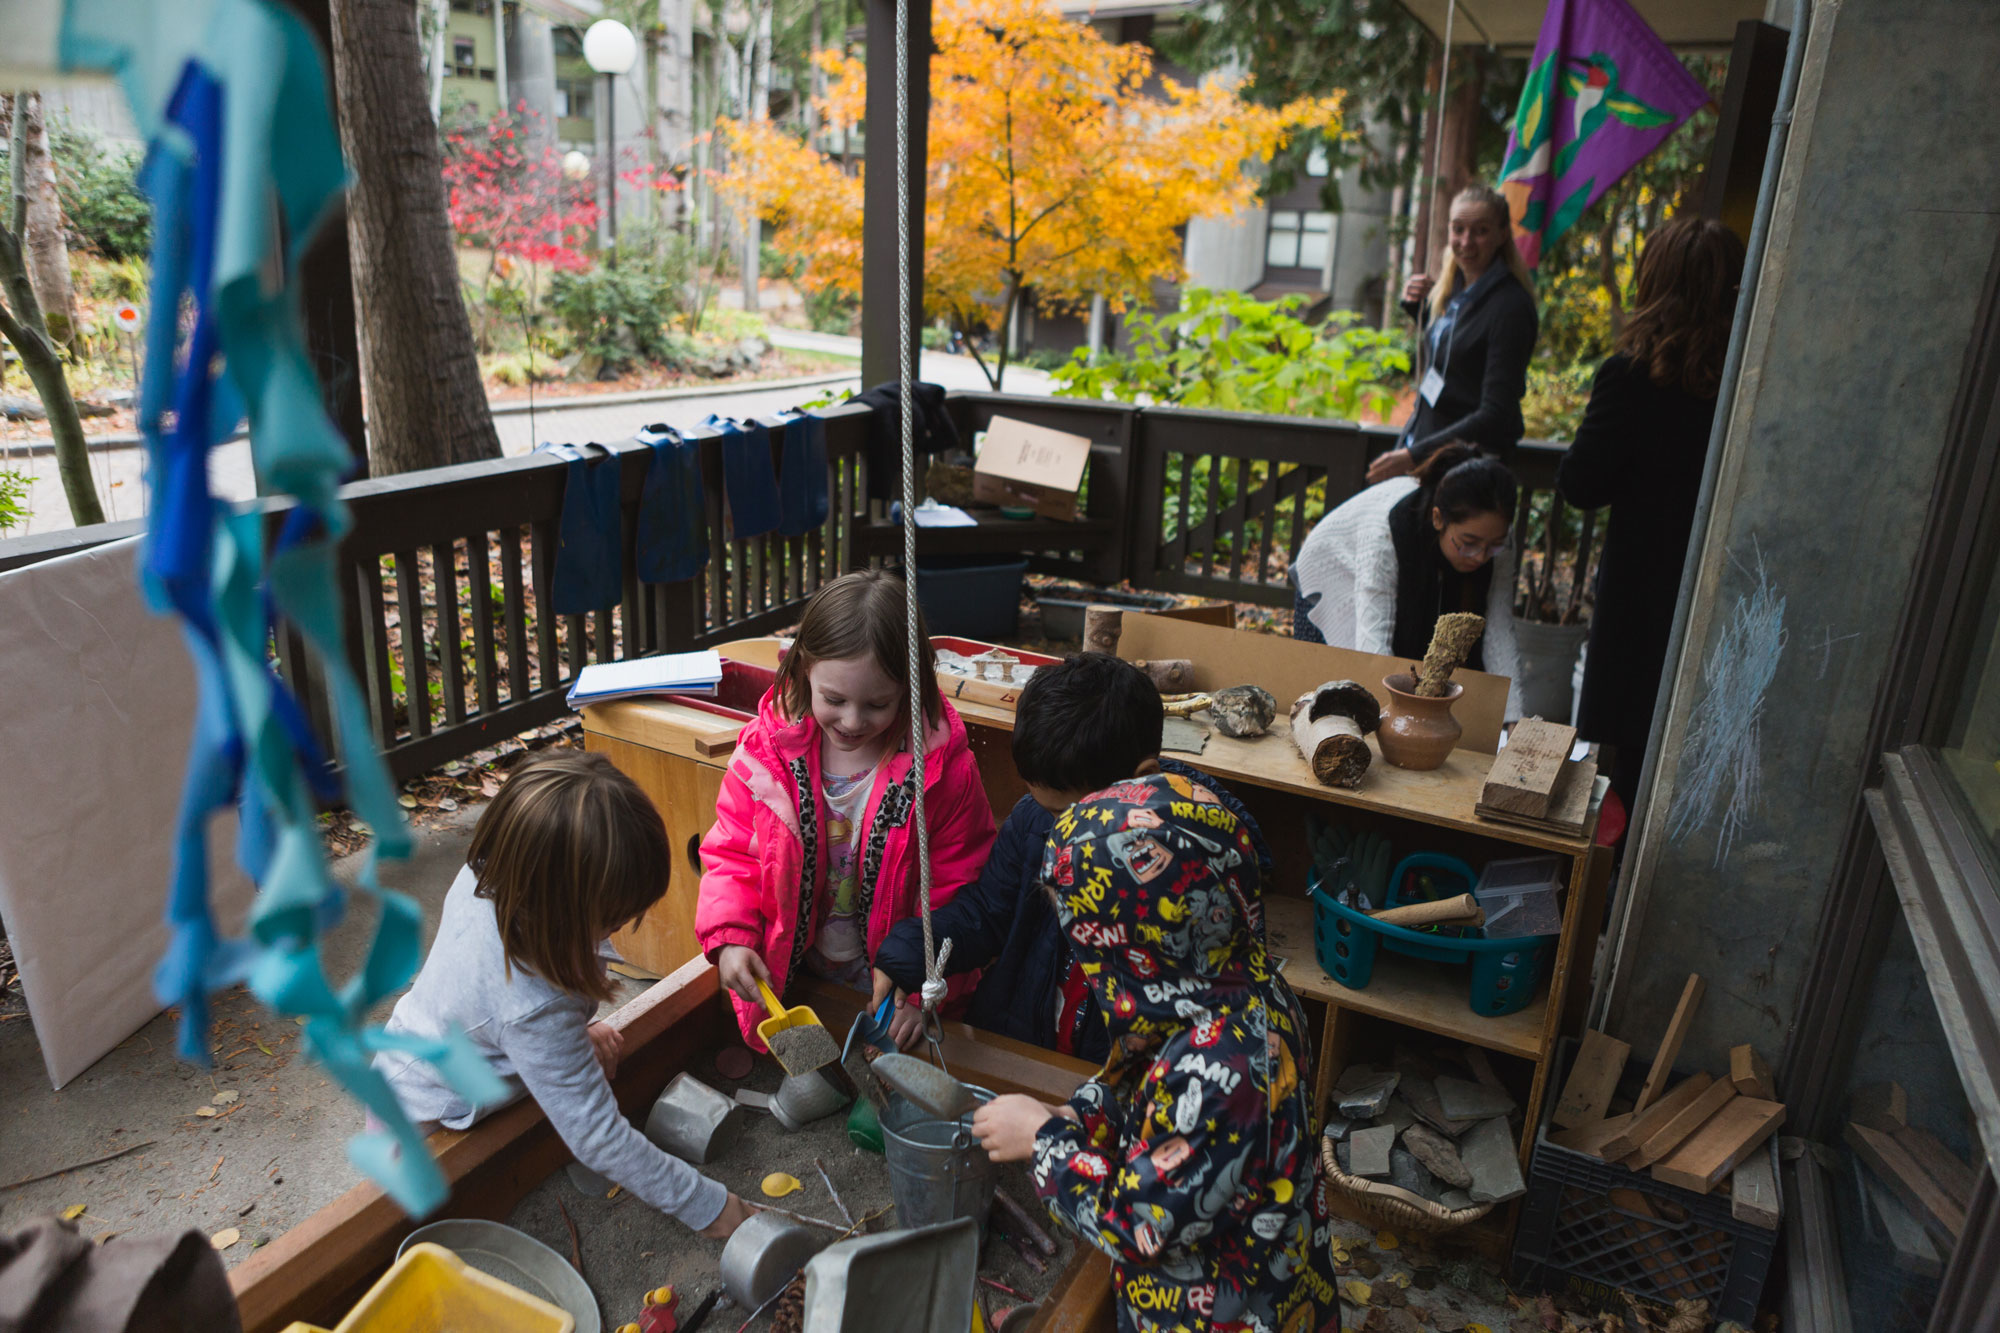 Children playing and learning at the WWU Associated Students Child Development Center